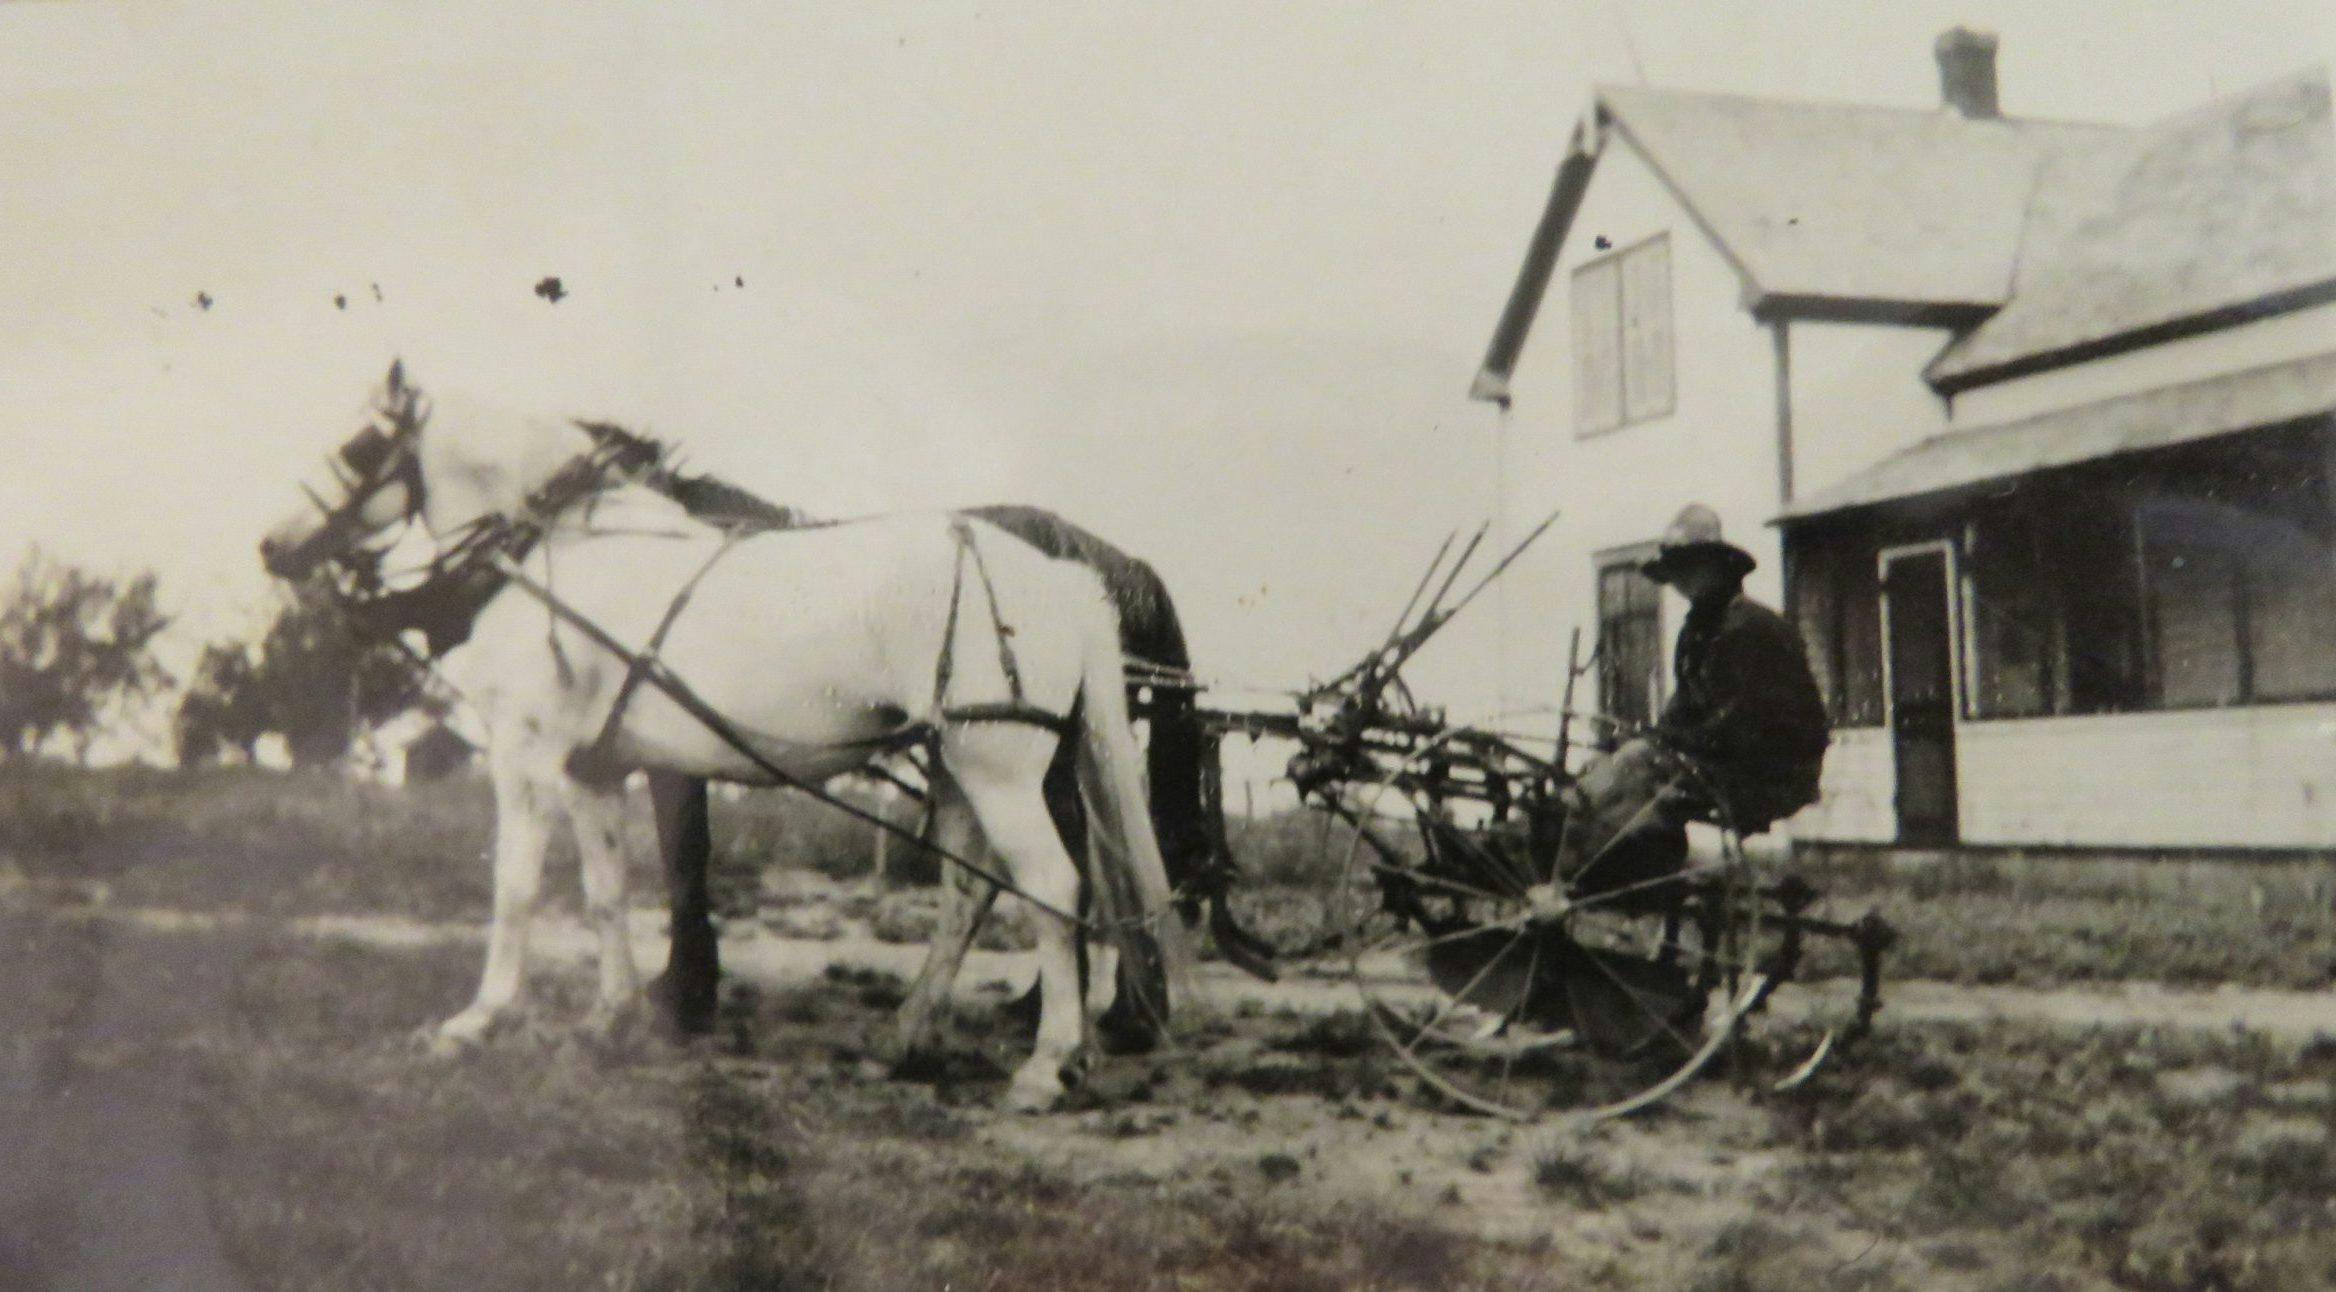 Vanderbrink - Krinke Collection - old pic of farming with horses